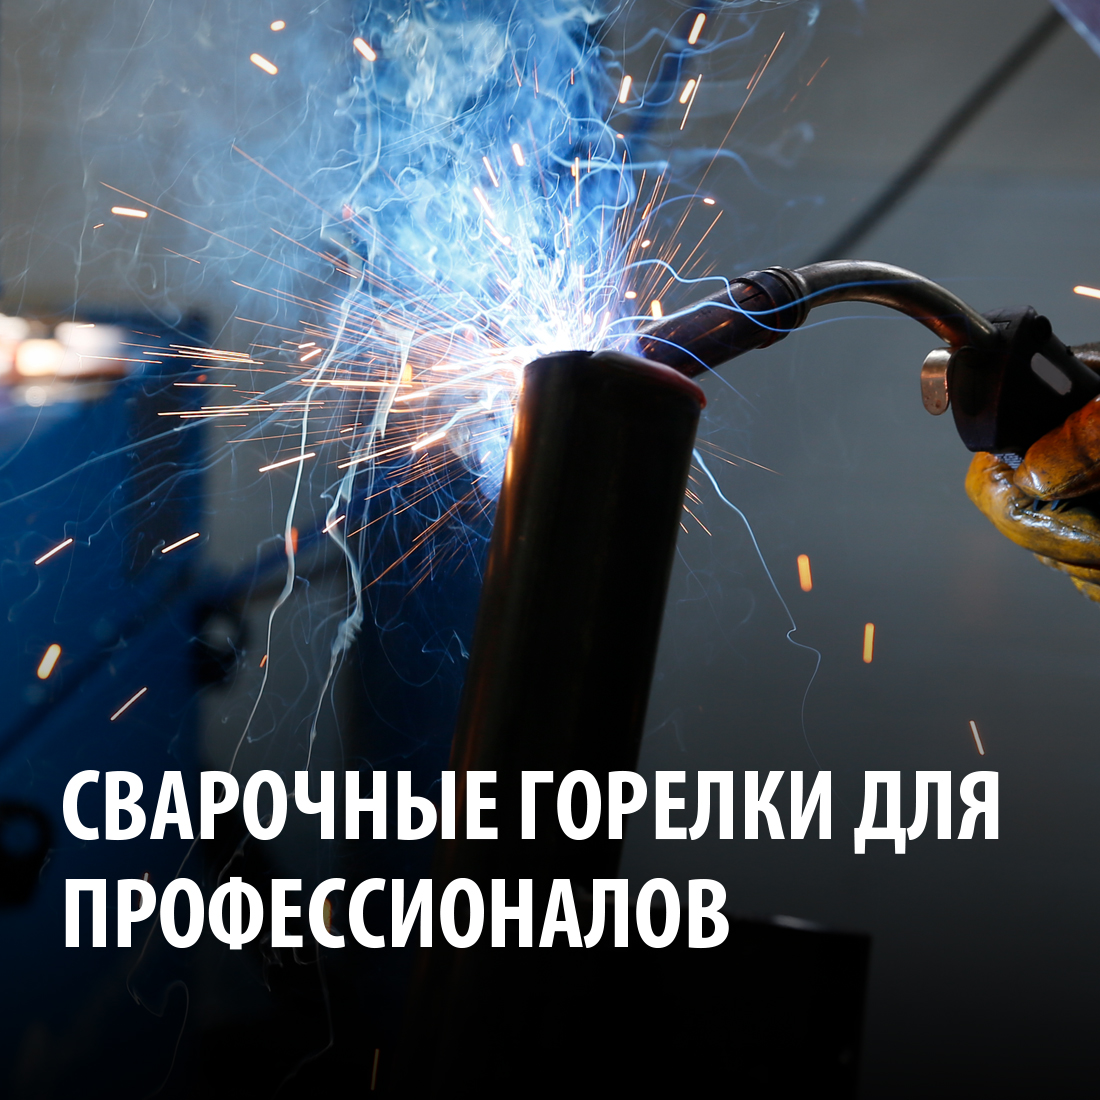 Welding Torches for Professionals